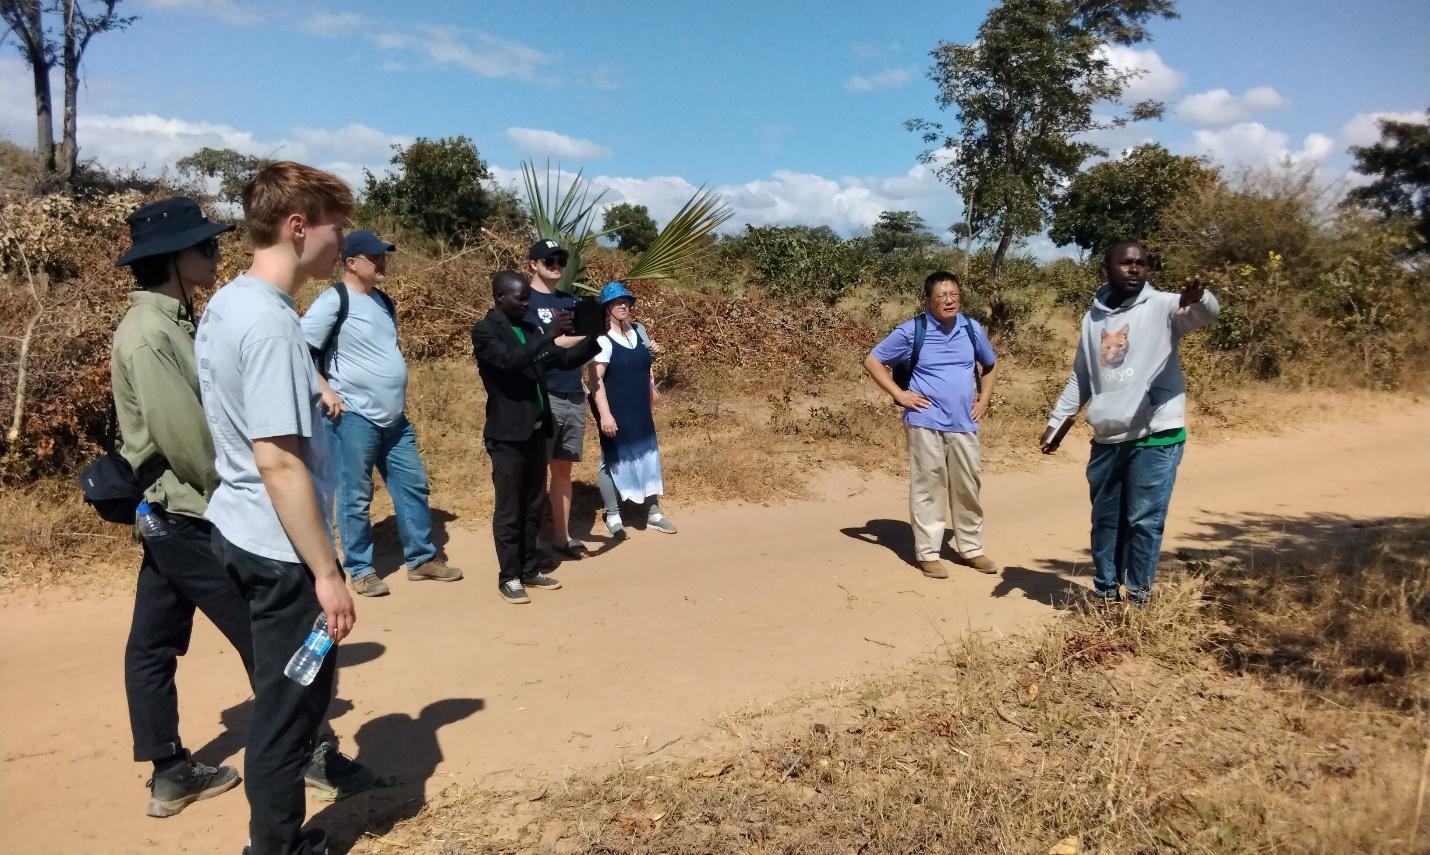 A group of people walking on a dirt road

Description automatically generated